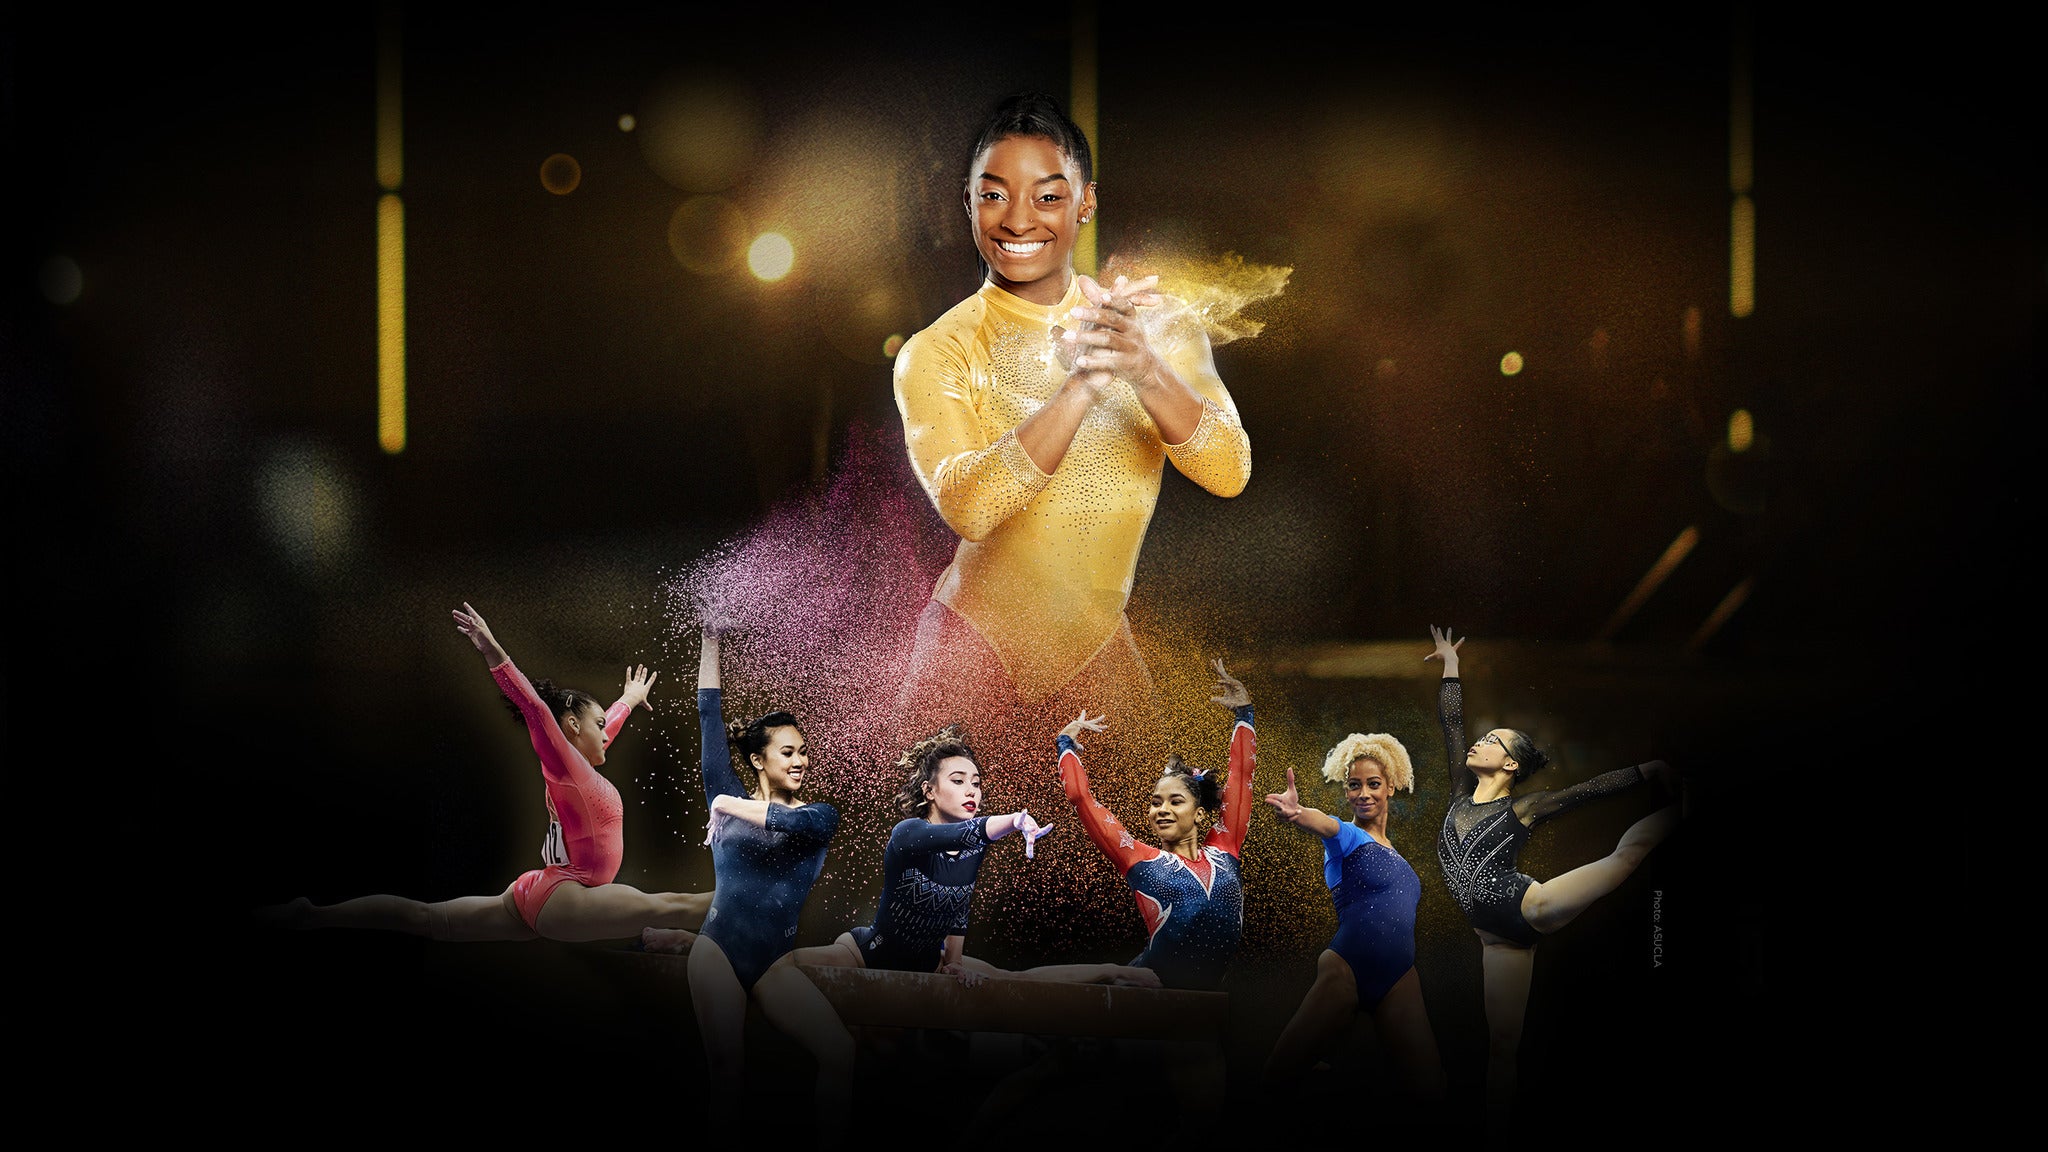 G.O.A.T. Gold Over America Tour Starring Simone Biles in San Jose promo photo for Official Platinum presale offer code